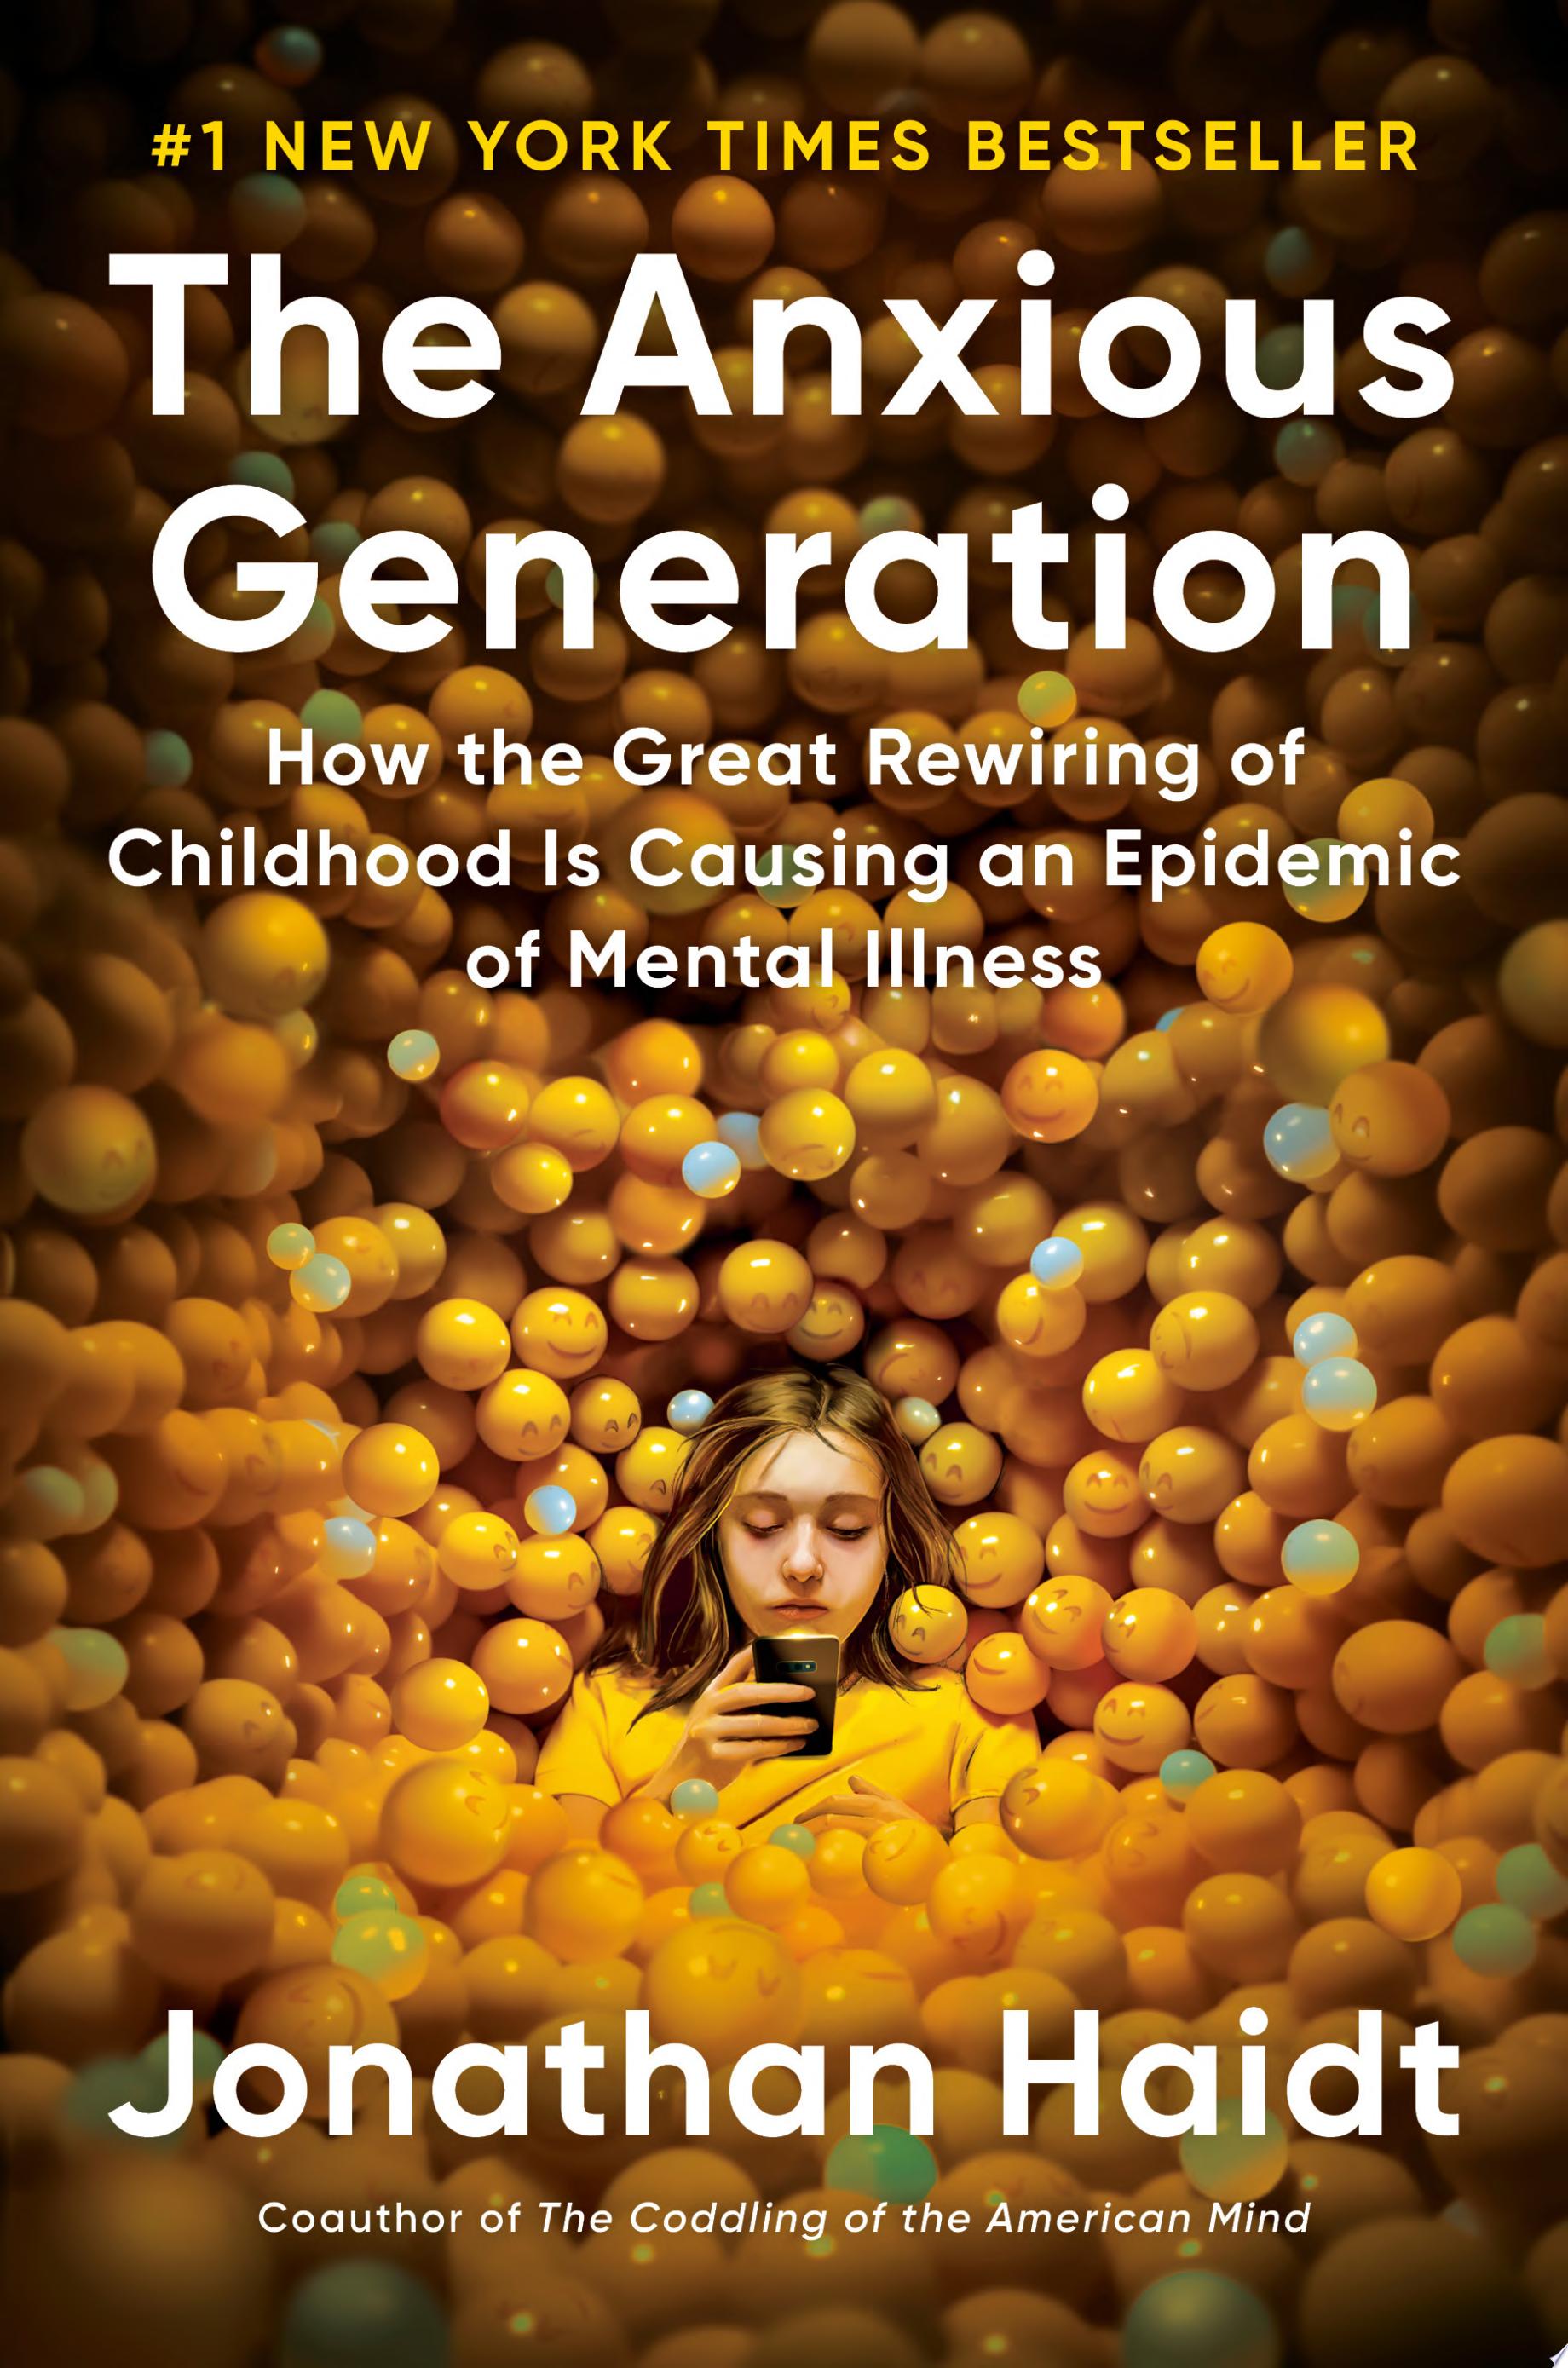 book cover for "The Anxious Generation"